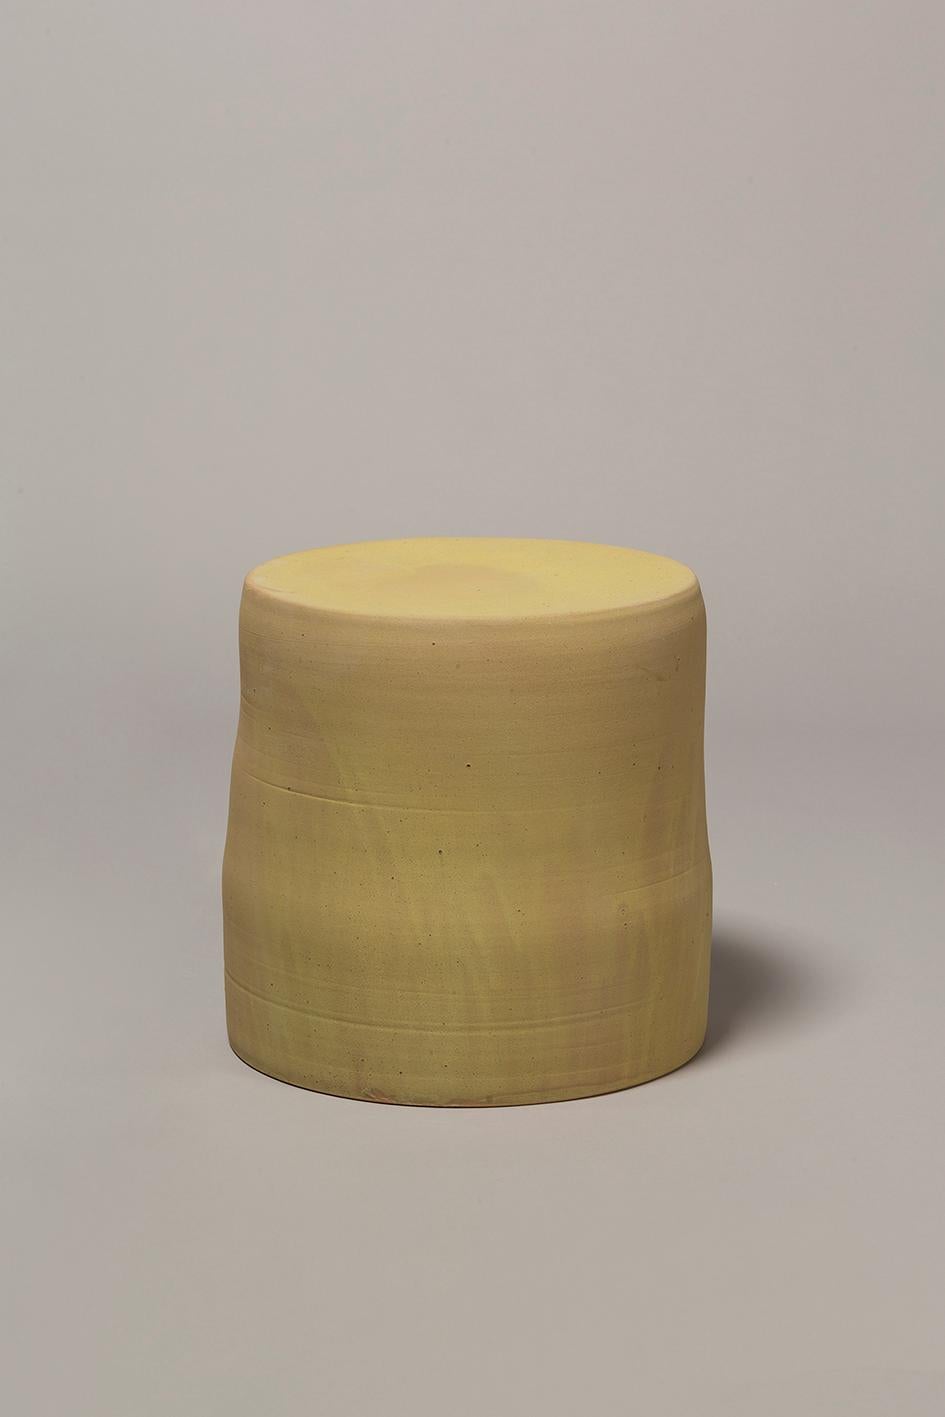 Hand thrown stoneware side table with four layers of glaze in multiple fires 1290Cº. Measures: 350mm high, 350mm diameter.